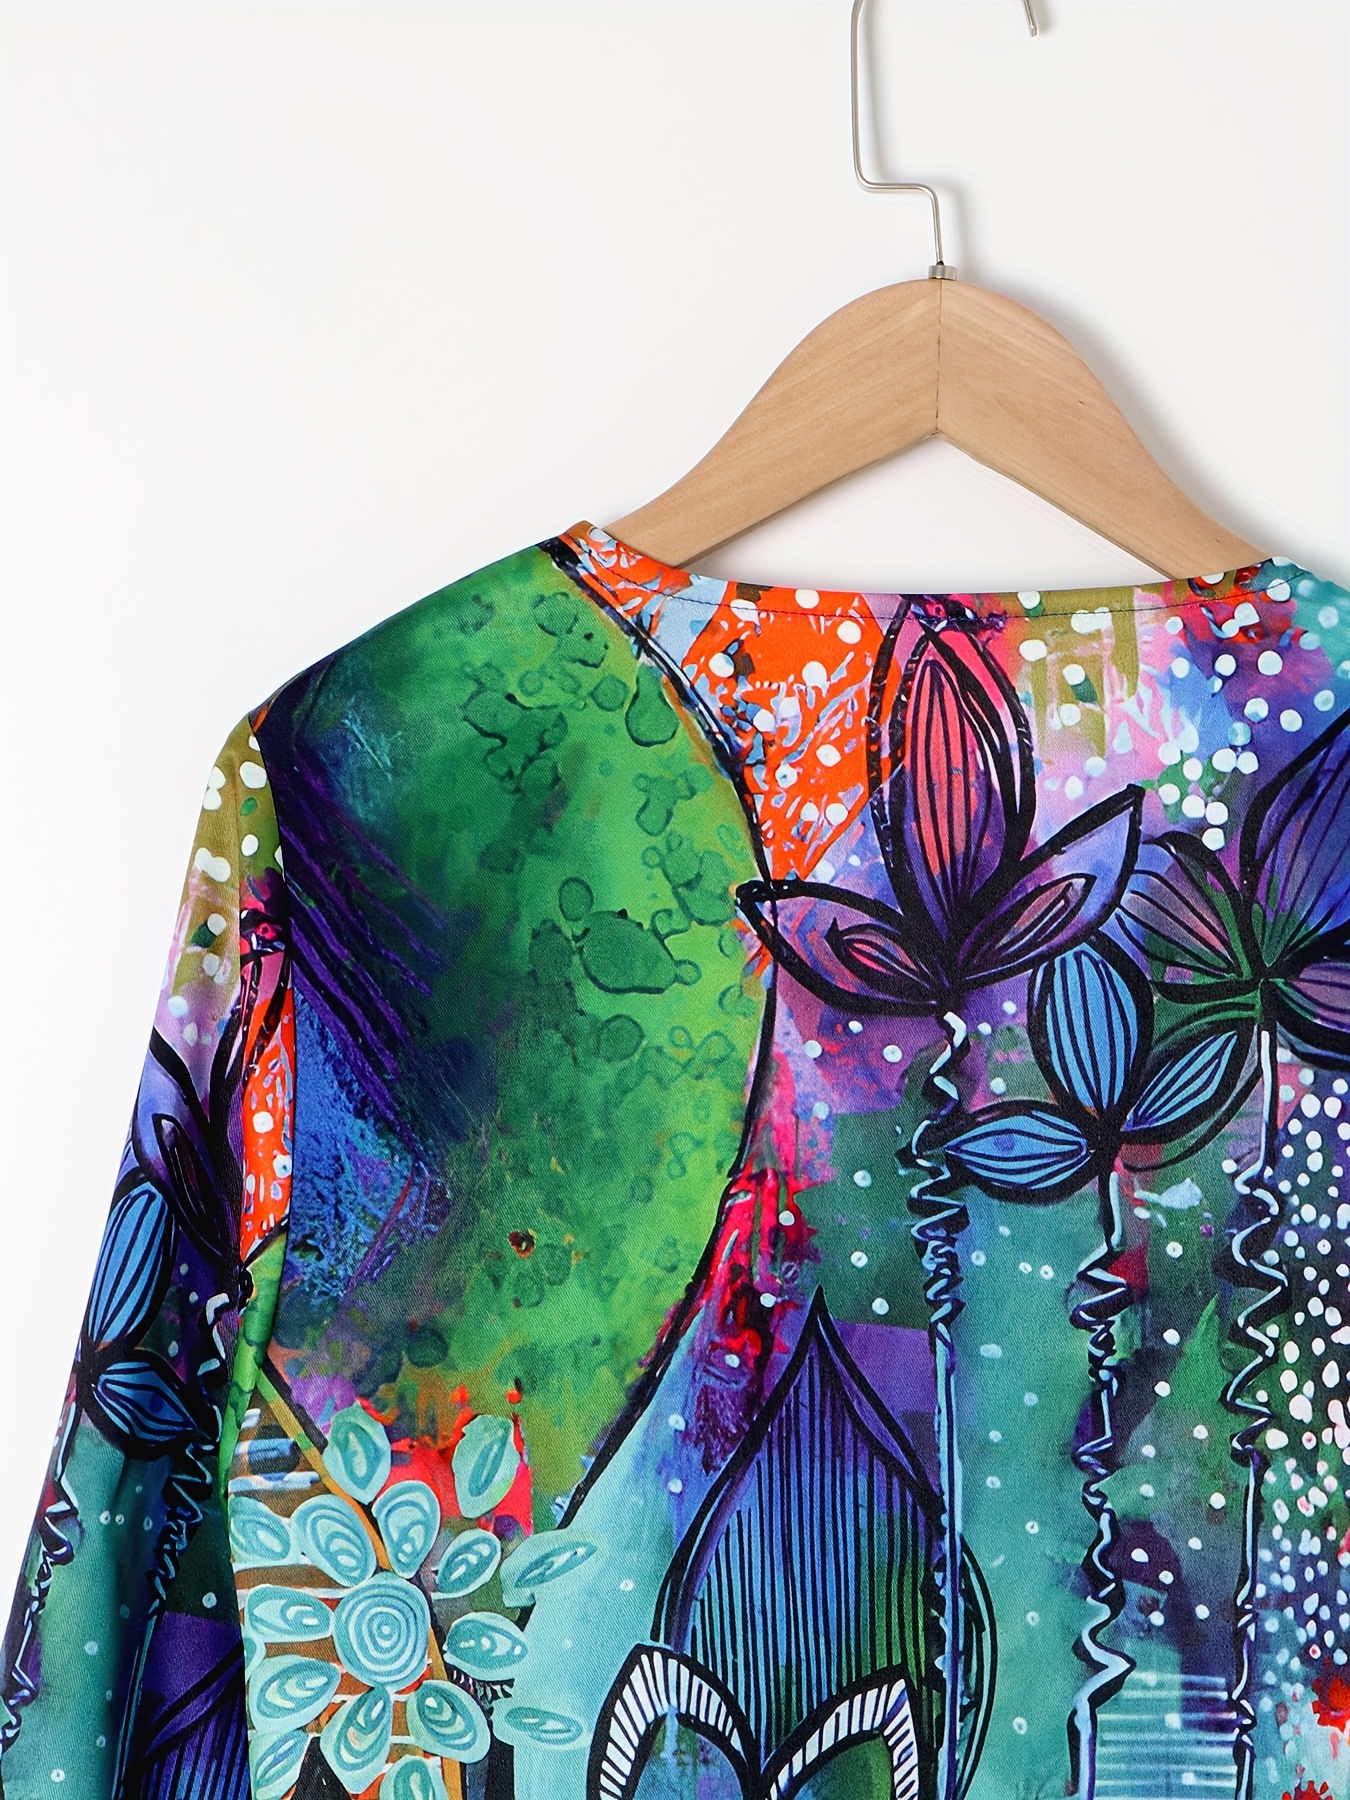 ethnic floral print open front jacket vintage long sleeve jacket for spring fall womens clothing